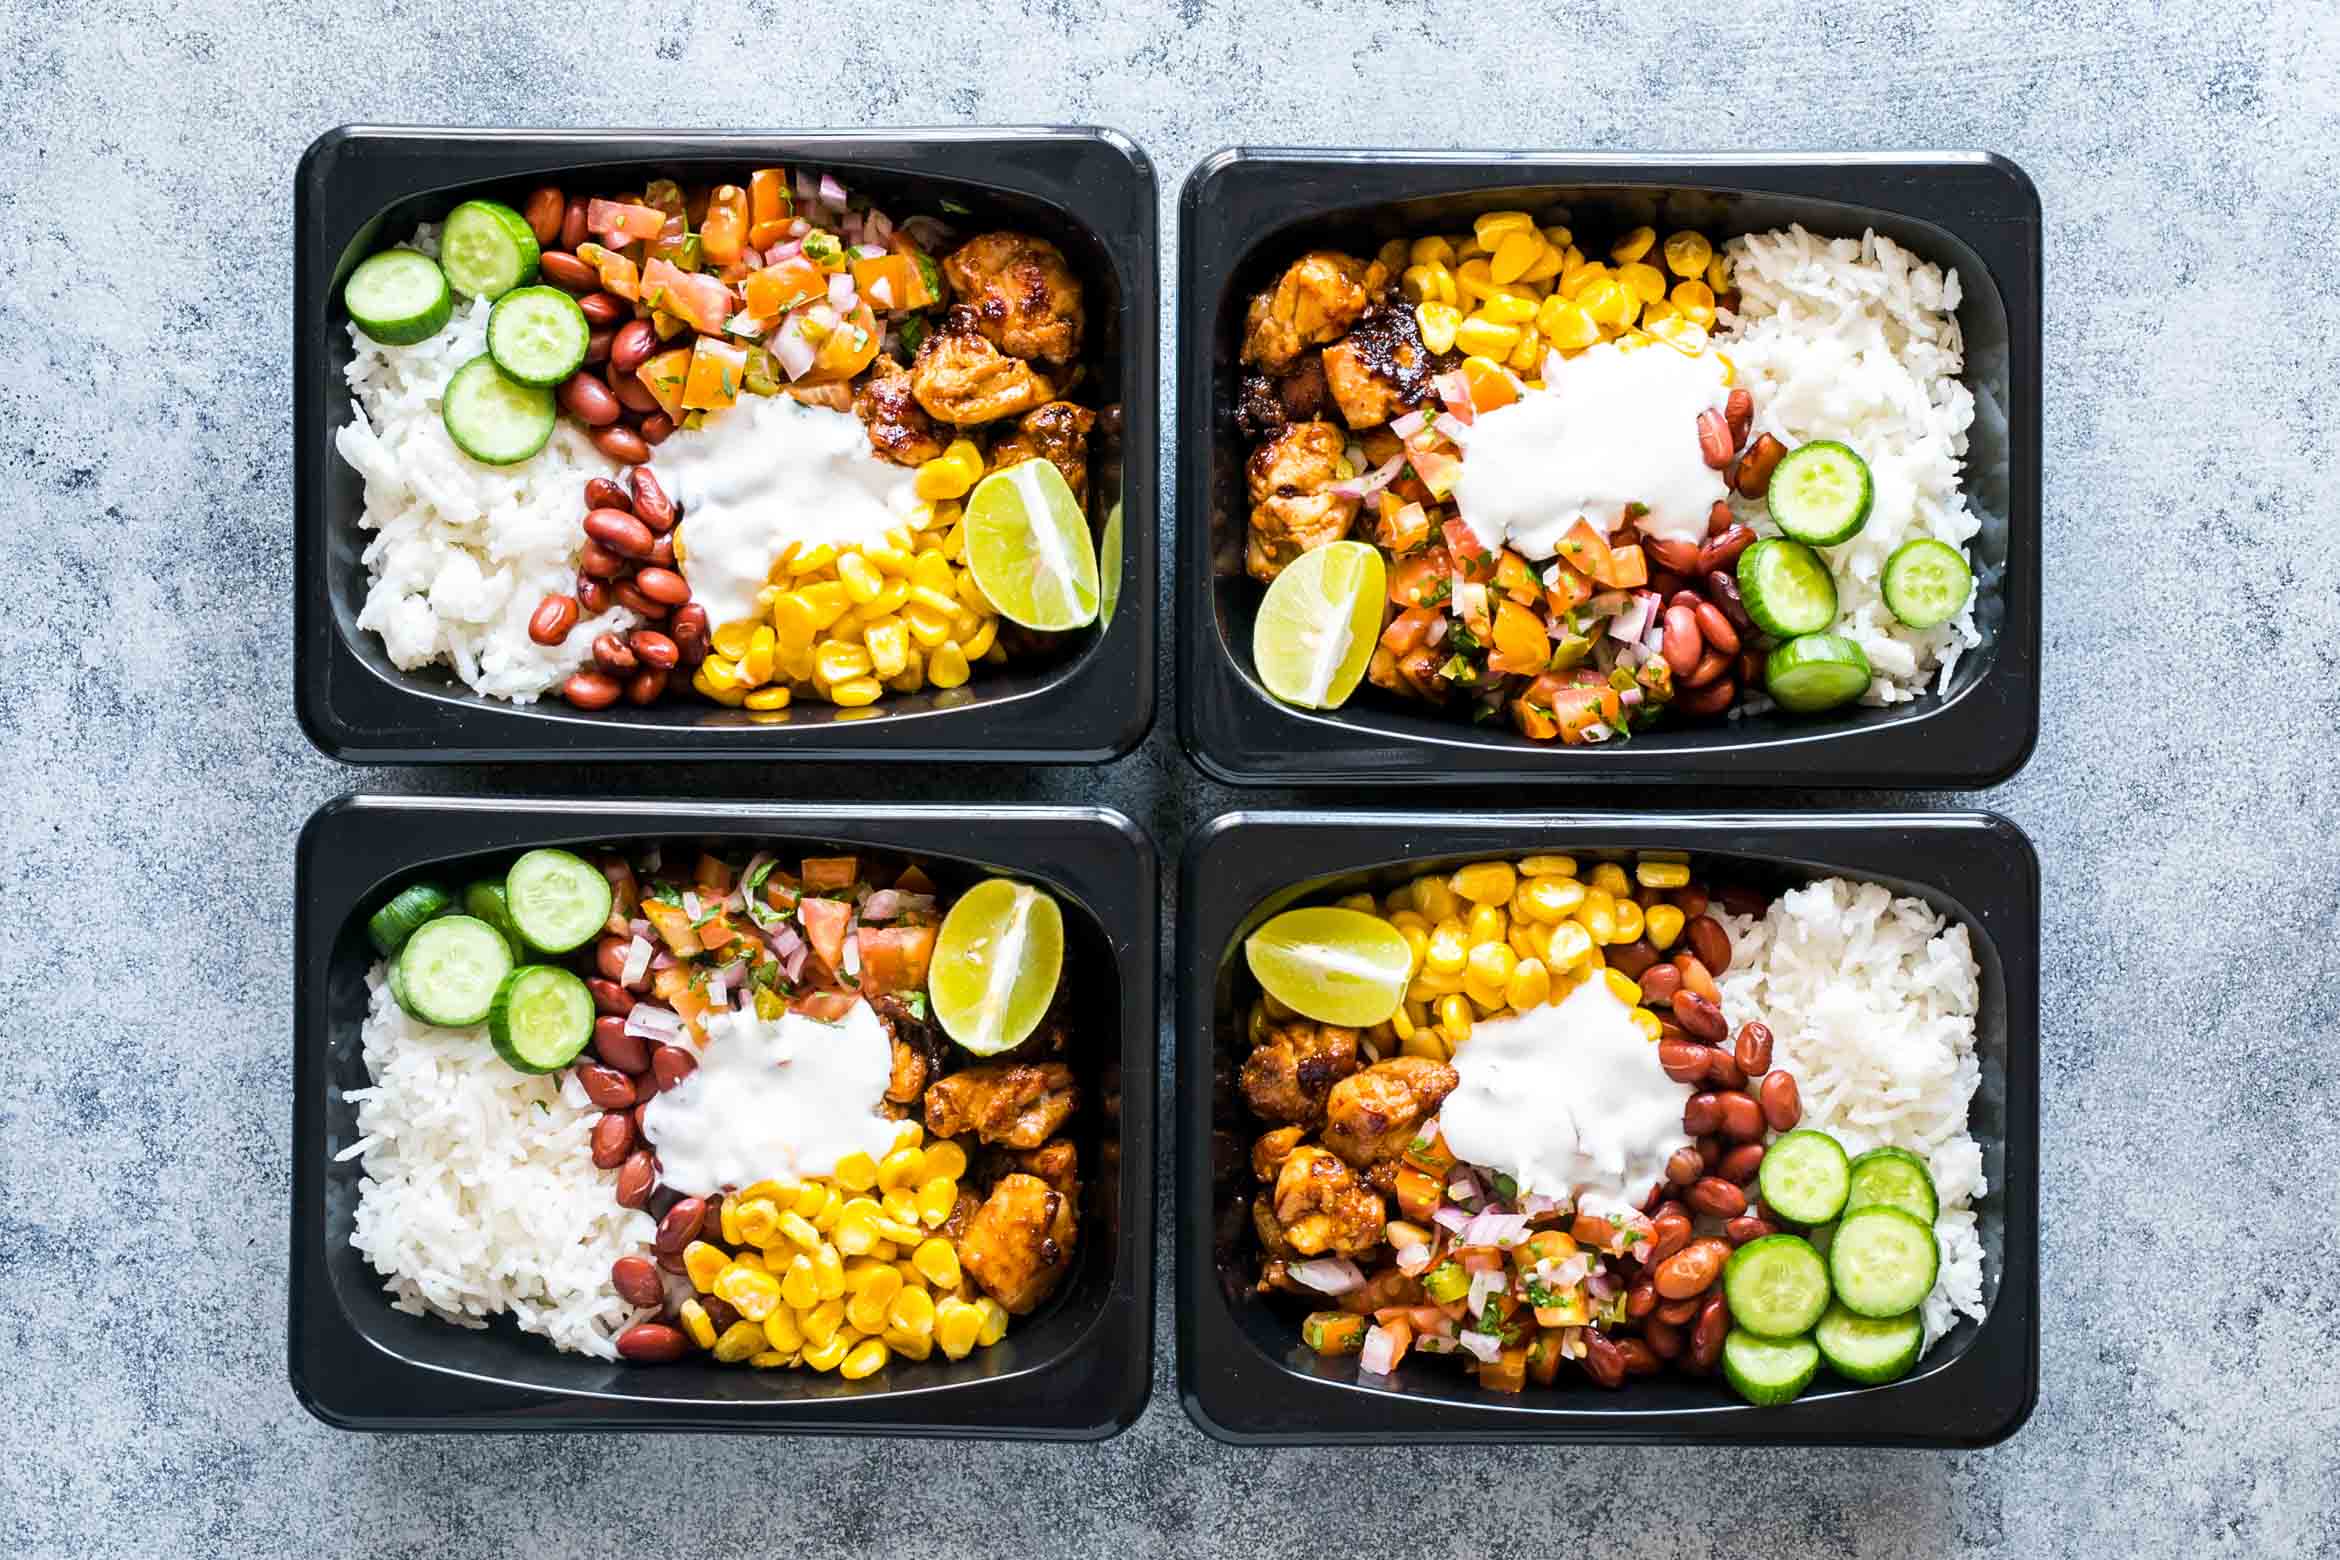 Easy chicken burrito meal prep bowls are perfect for planning weekday work lunches ahead! Four lunches ready in 60 mins - tasty, gluten free and healthy!